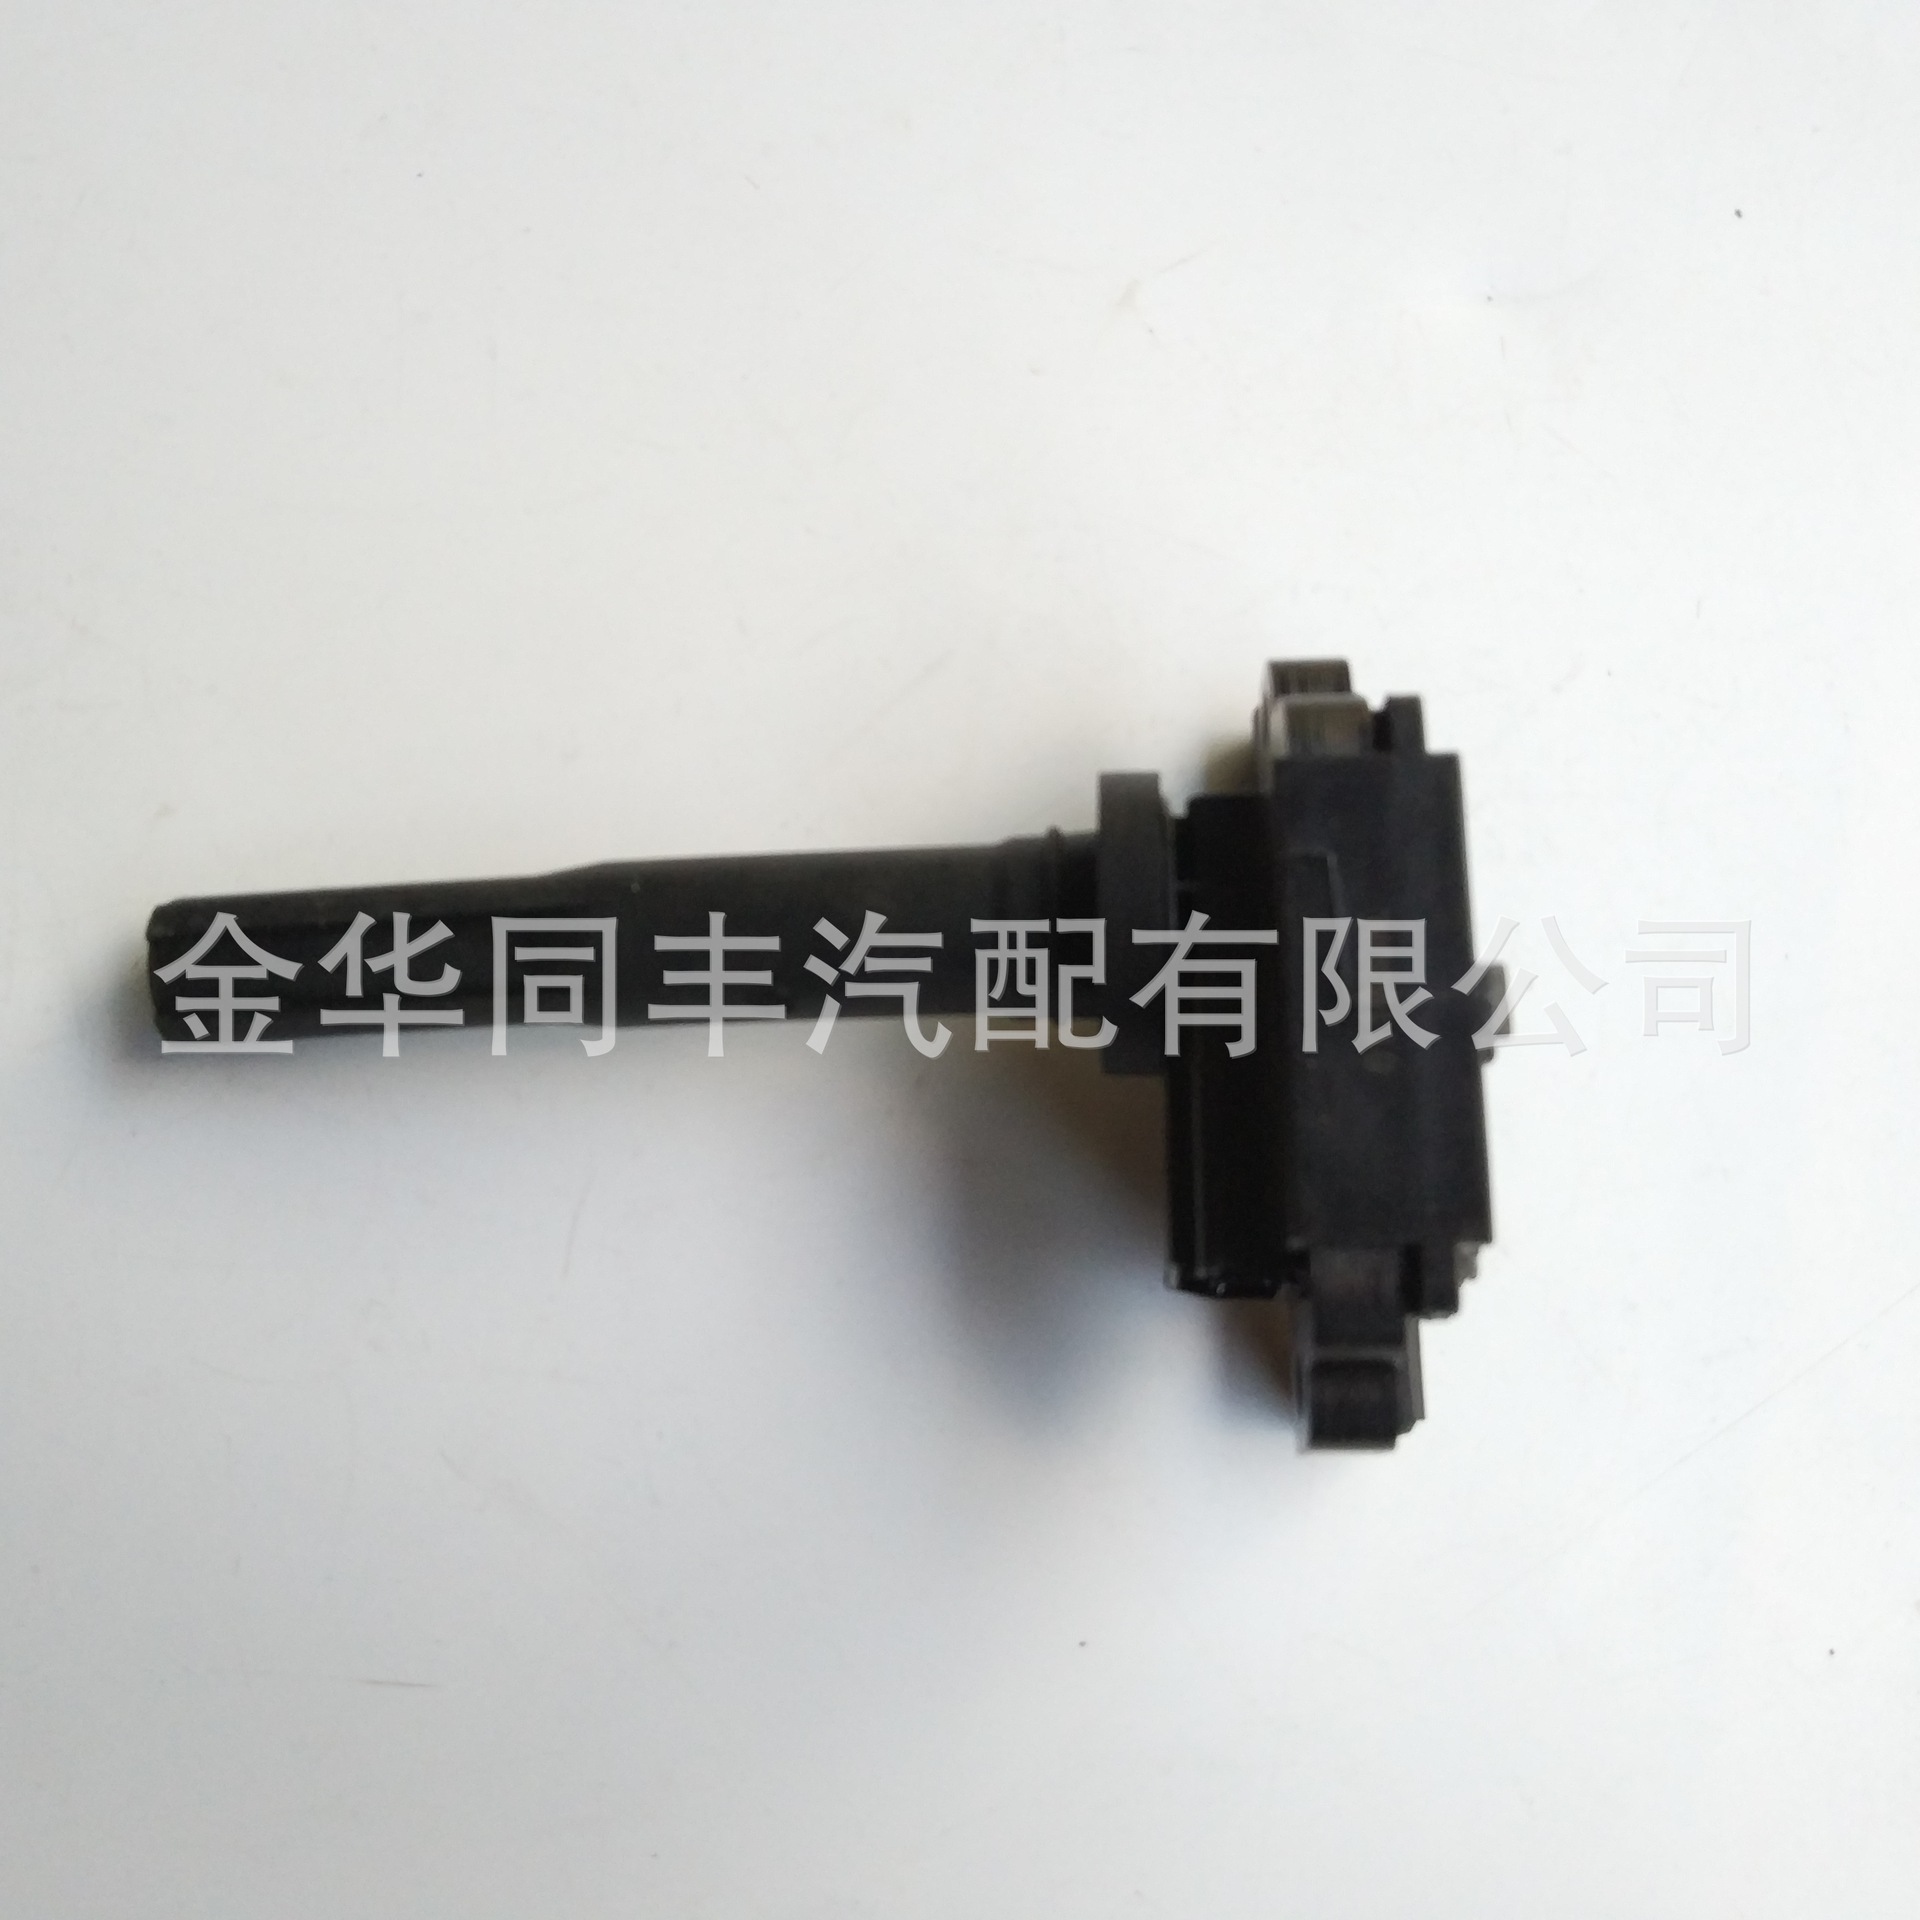 Changan Star Run S460 well-to-do 474 Ignition coil(Two plug)High pressure bag Matching Priced